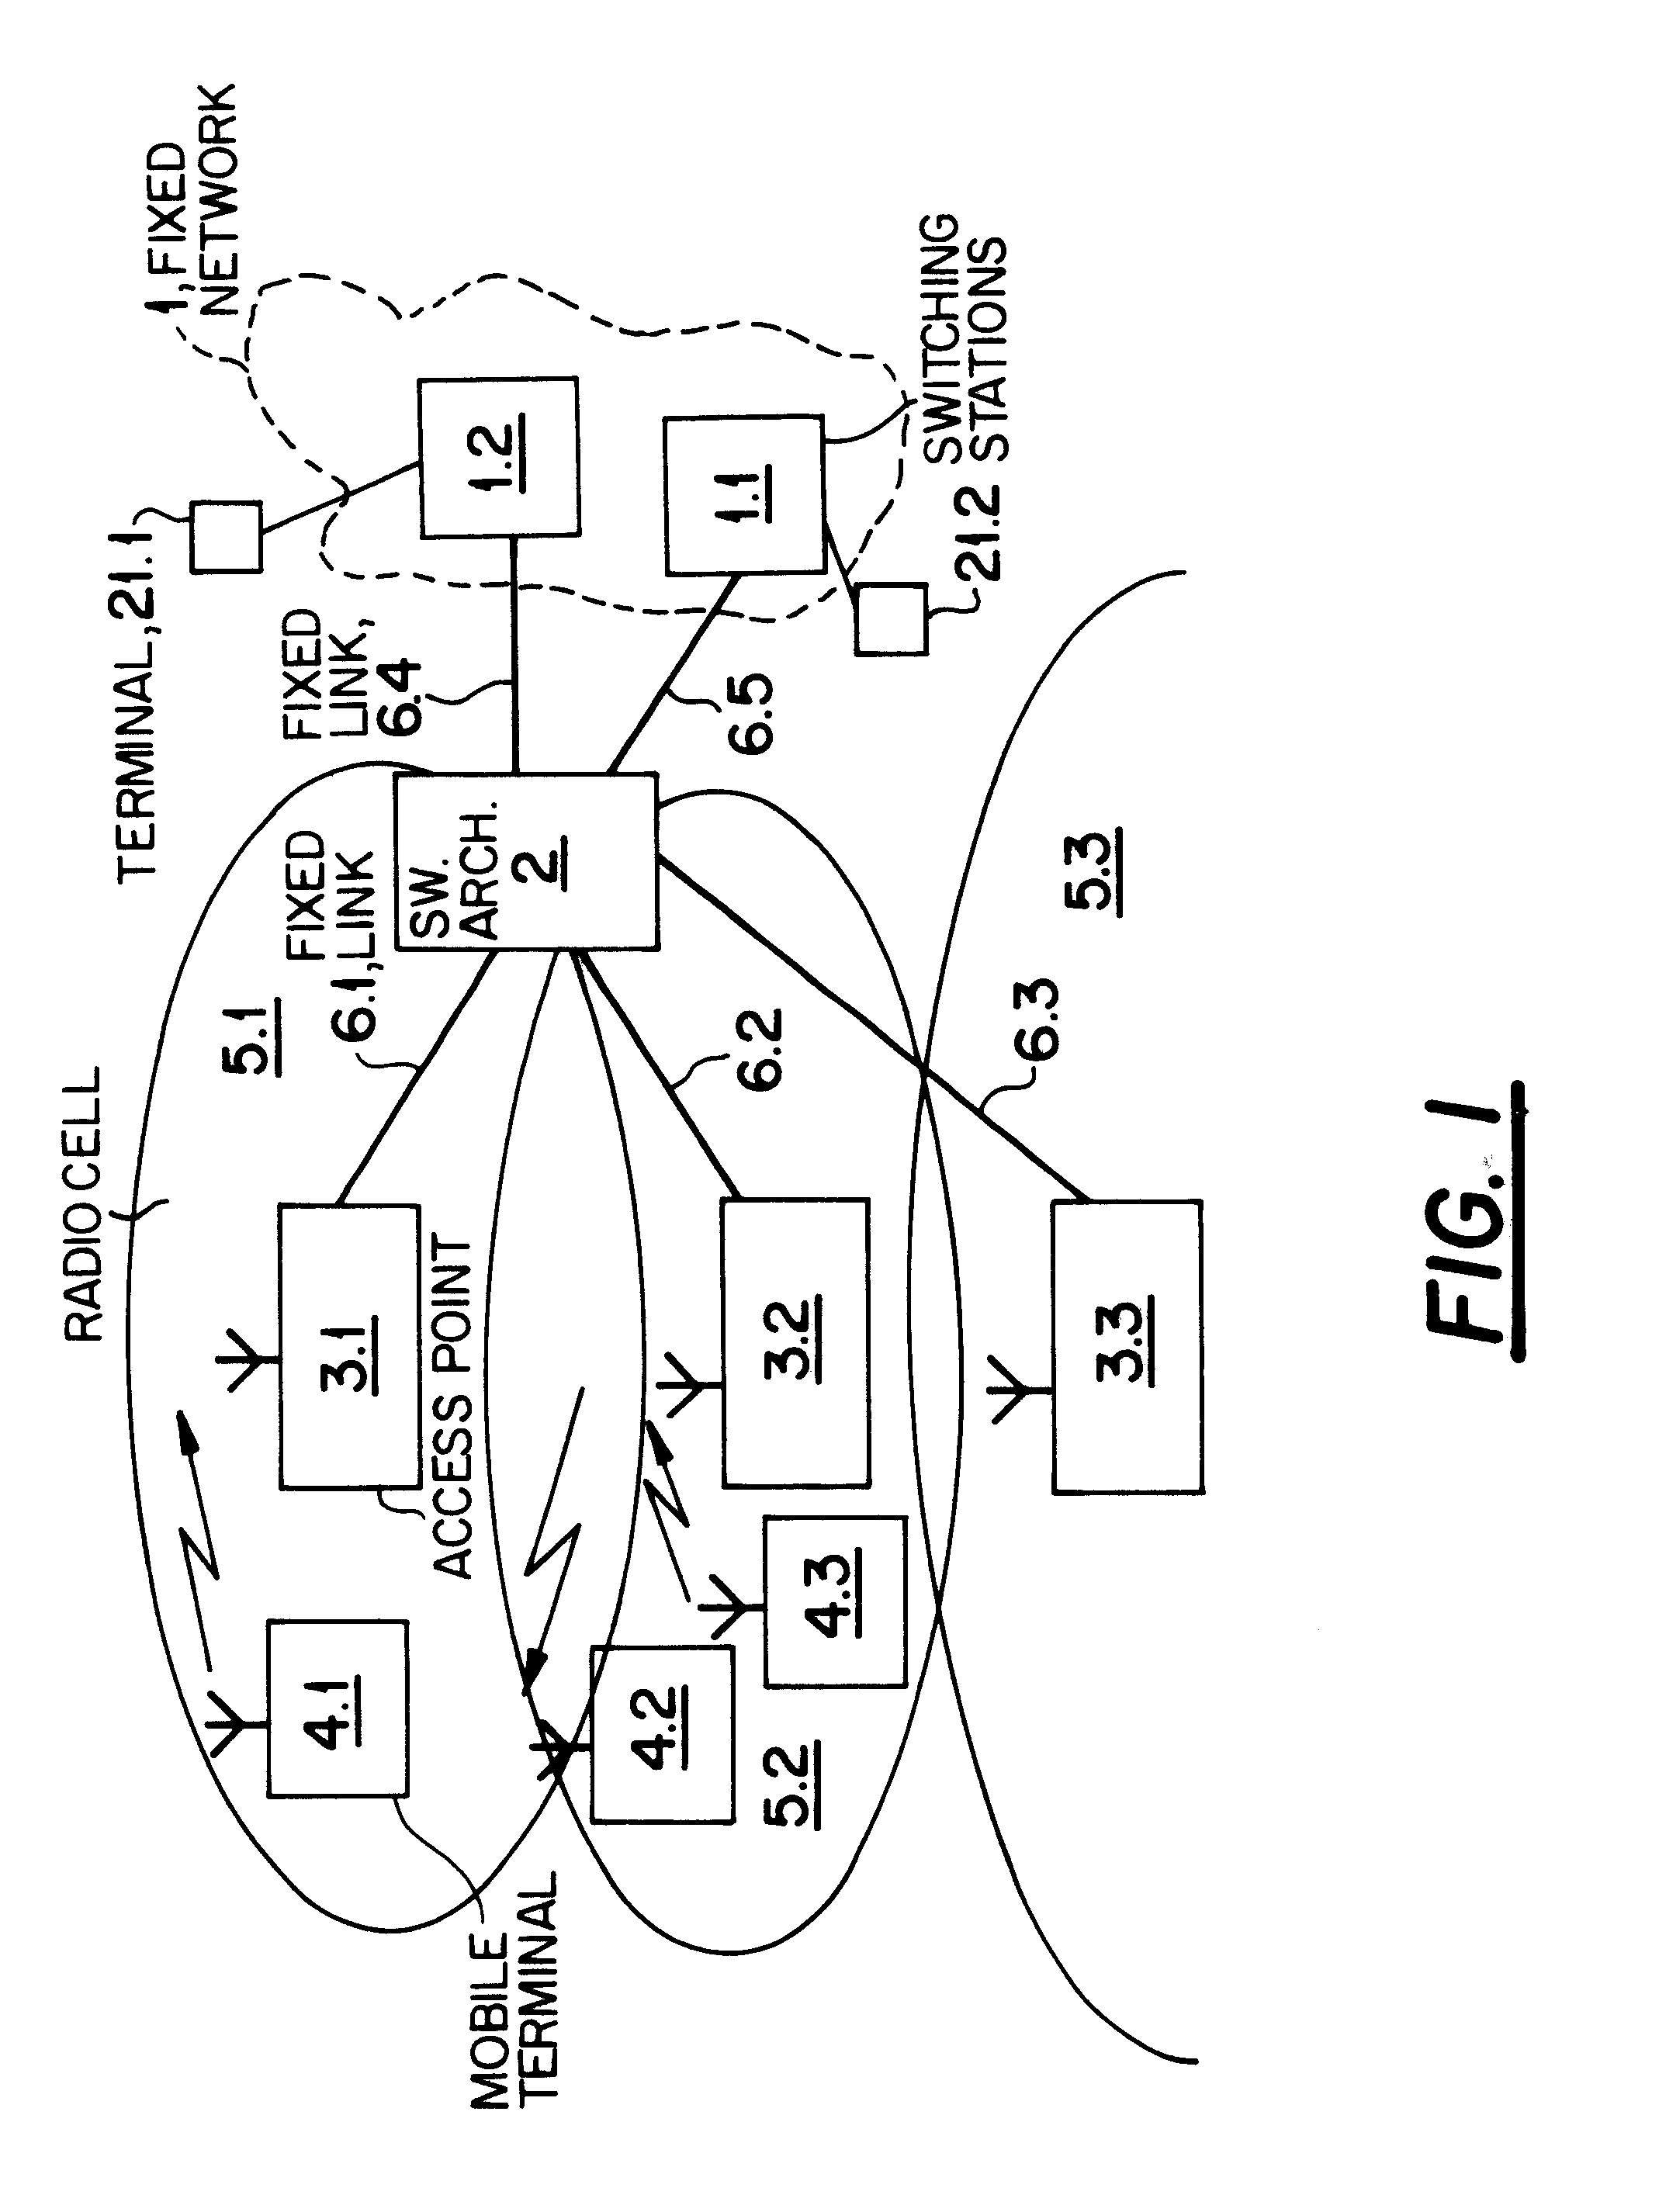 ATM switching architecture for a wireless telecommunications network